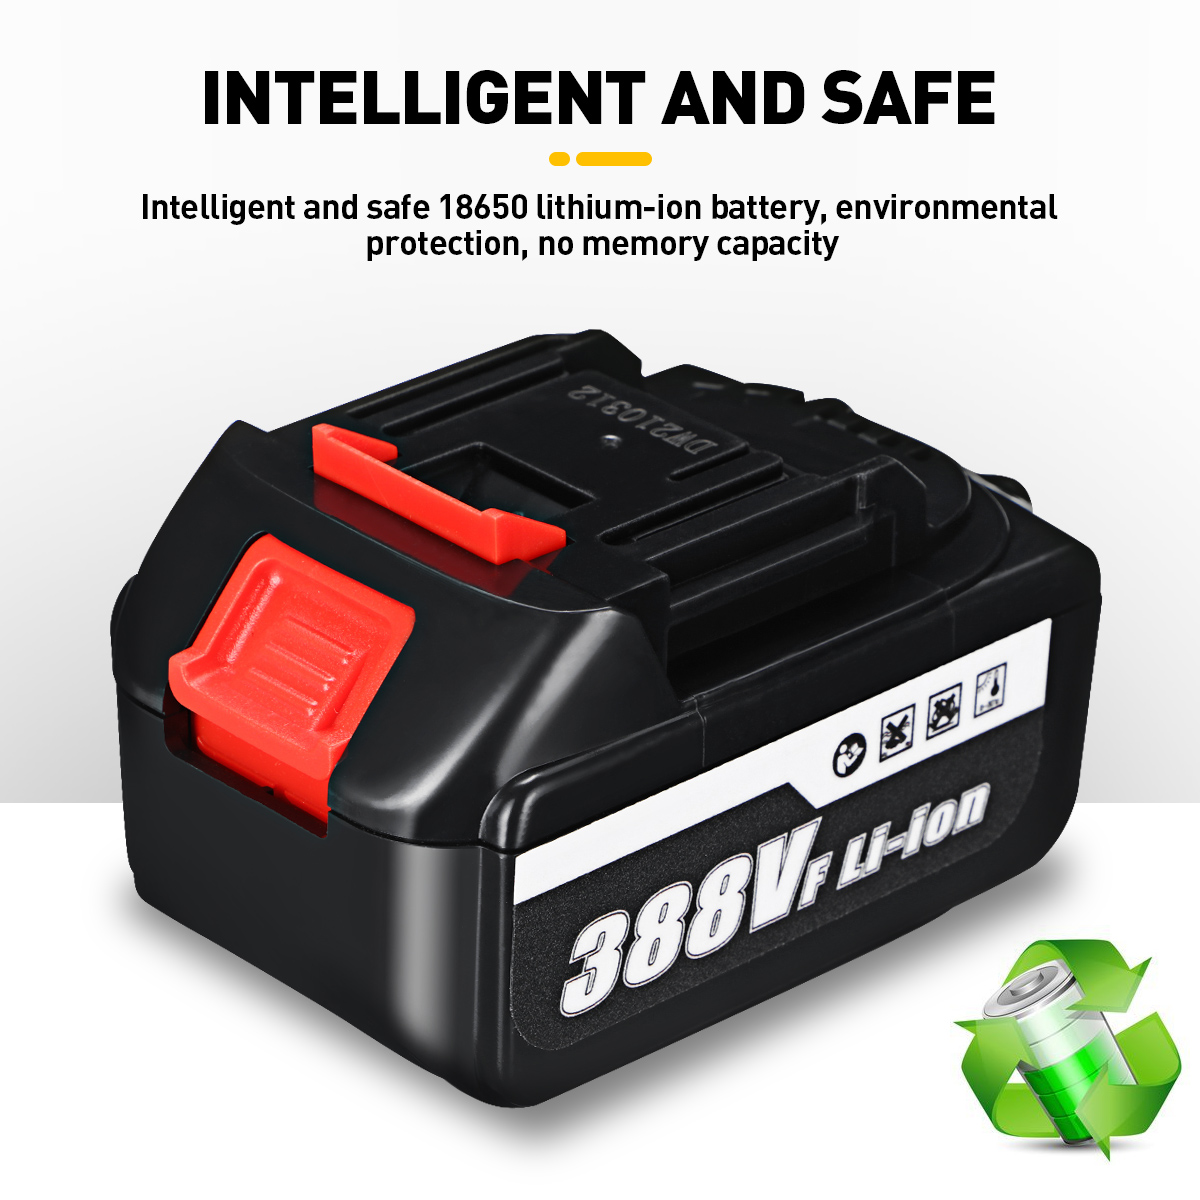 388v-18650-10000mAh-Lithium-ion-Battery-For-Tools-Angle-Grinder-Electromechanical-Drill-1940875-2